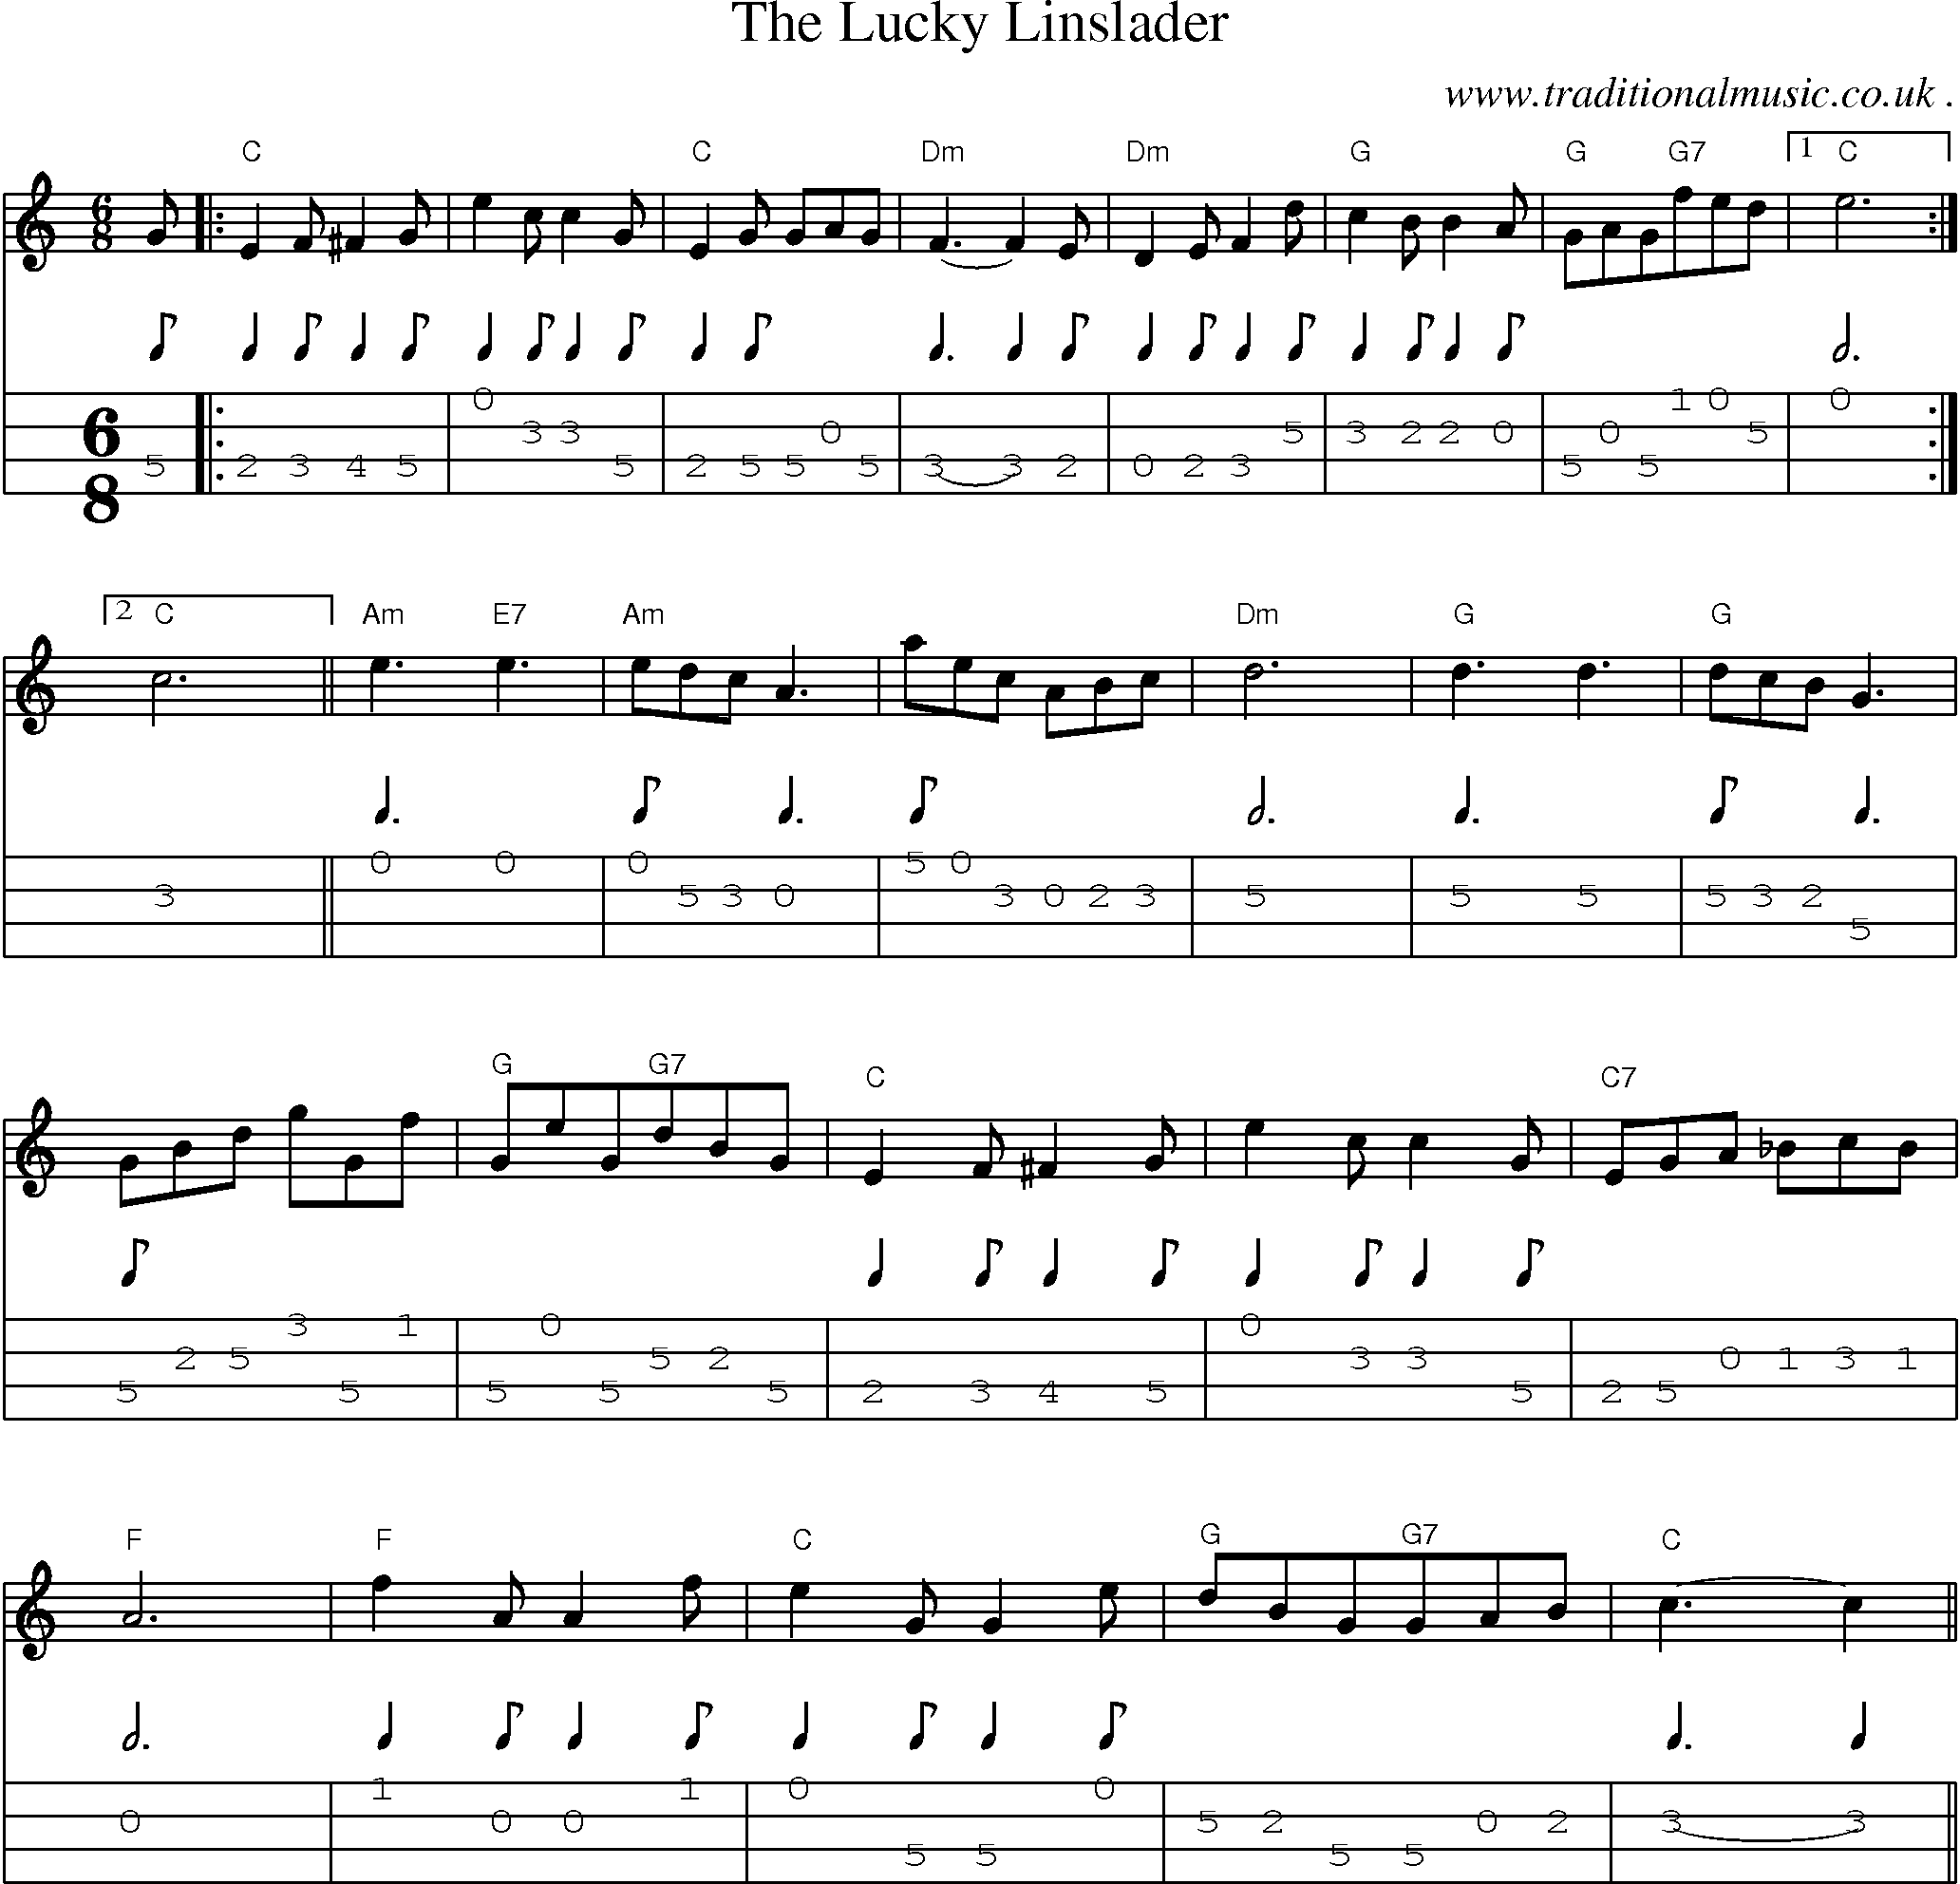 Sheet-Music and Mandolin Tabs for The Lucky Linslader